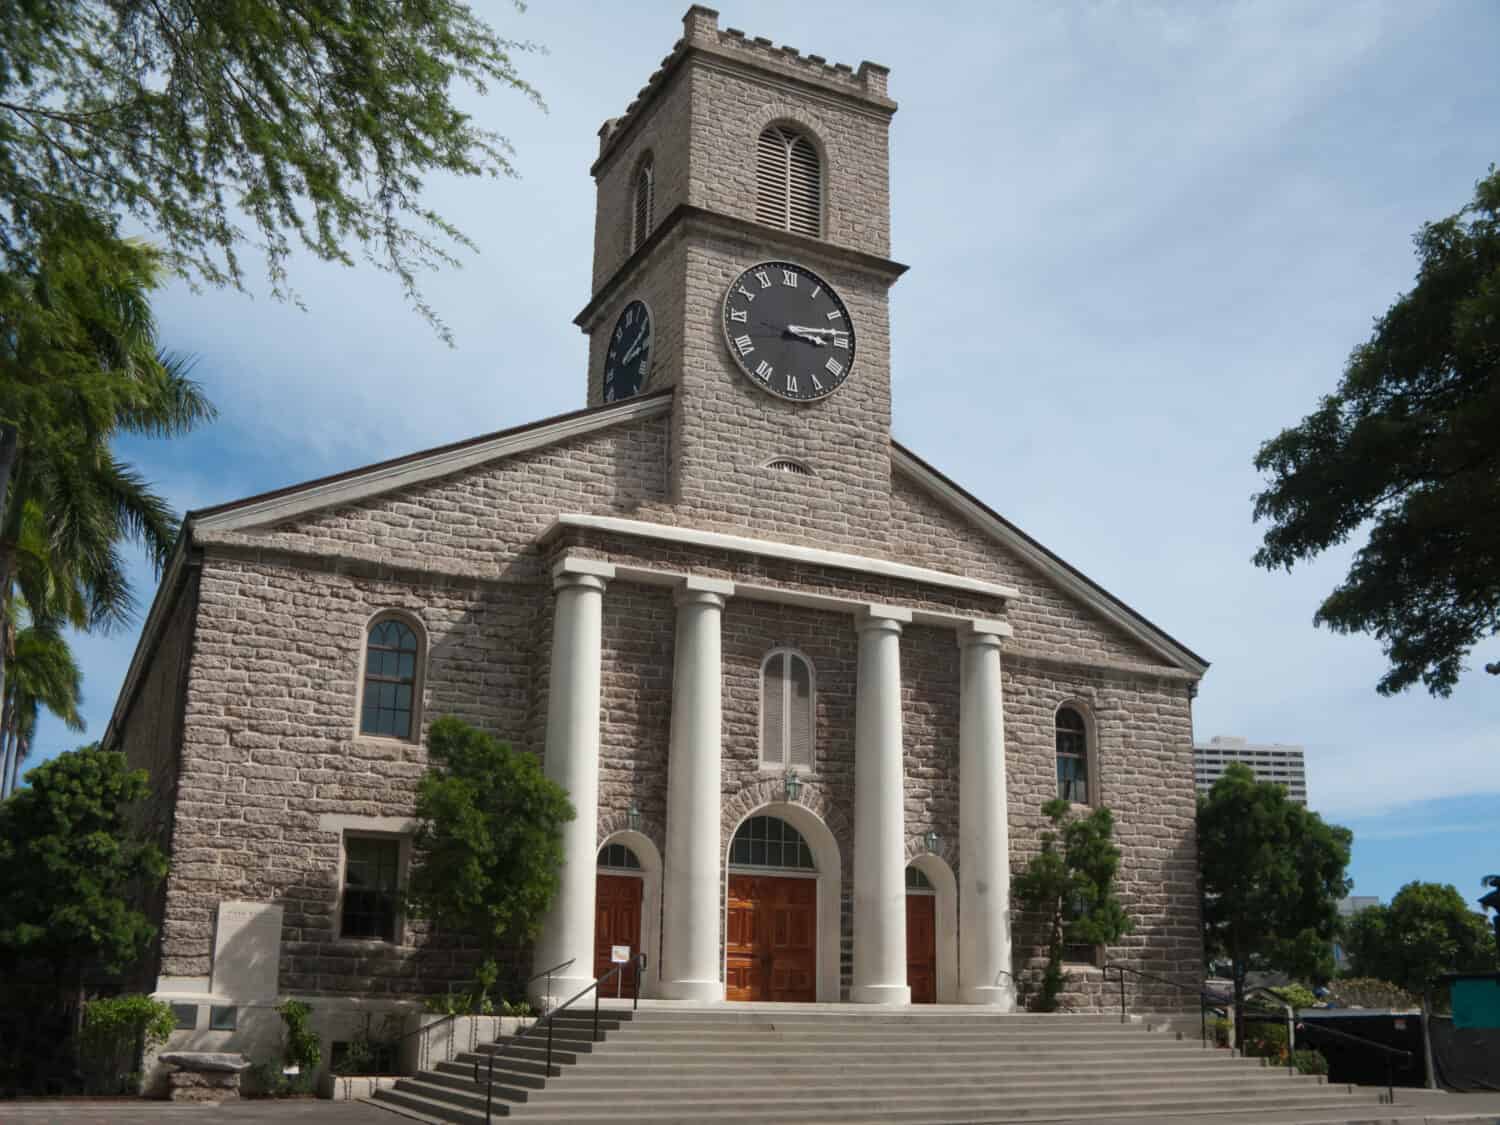 Historic Kawaiahao Church, Honolulu's oldest Christian church, was constructed in 1820 of coral blocks.